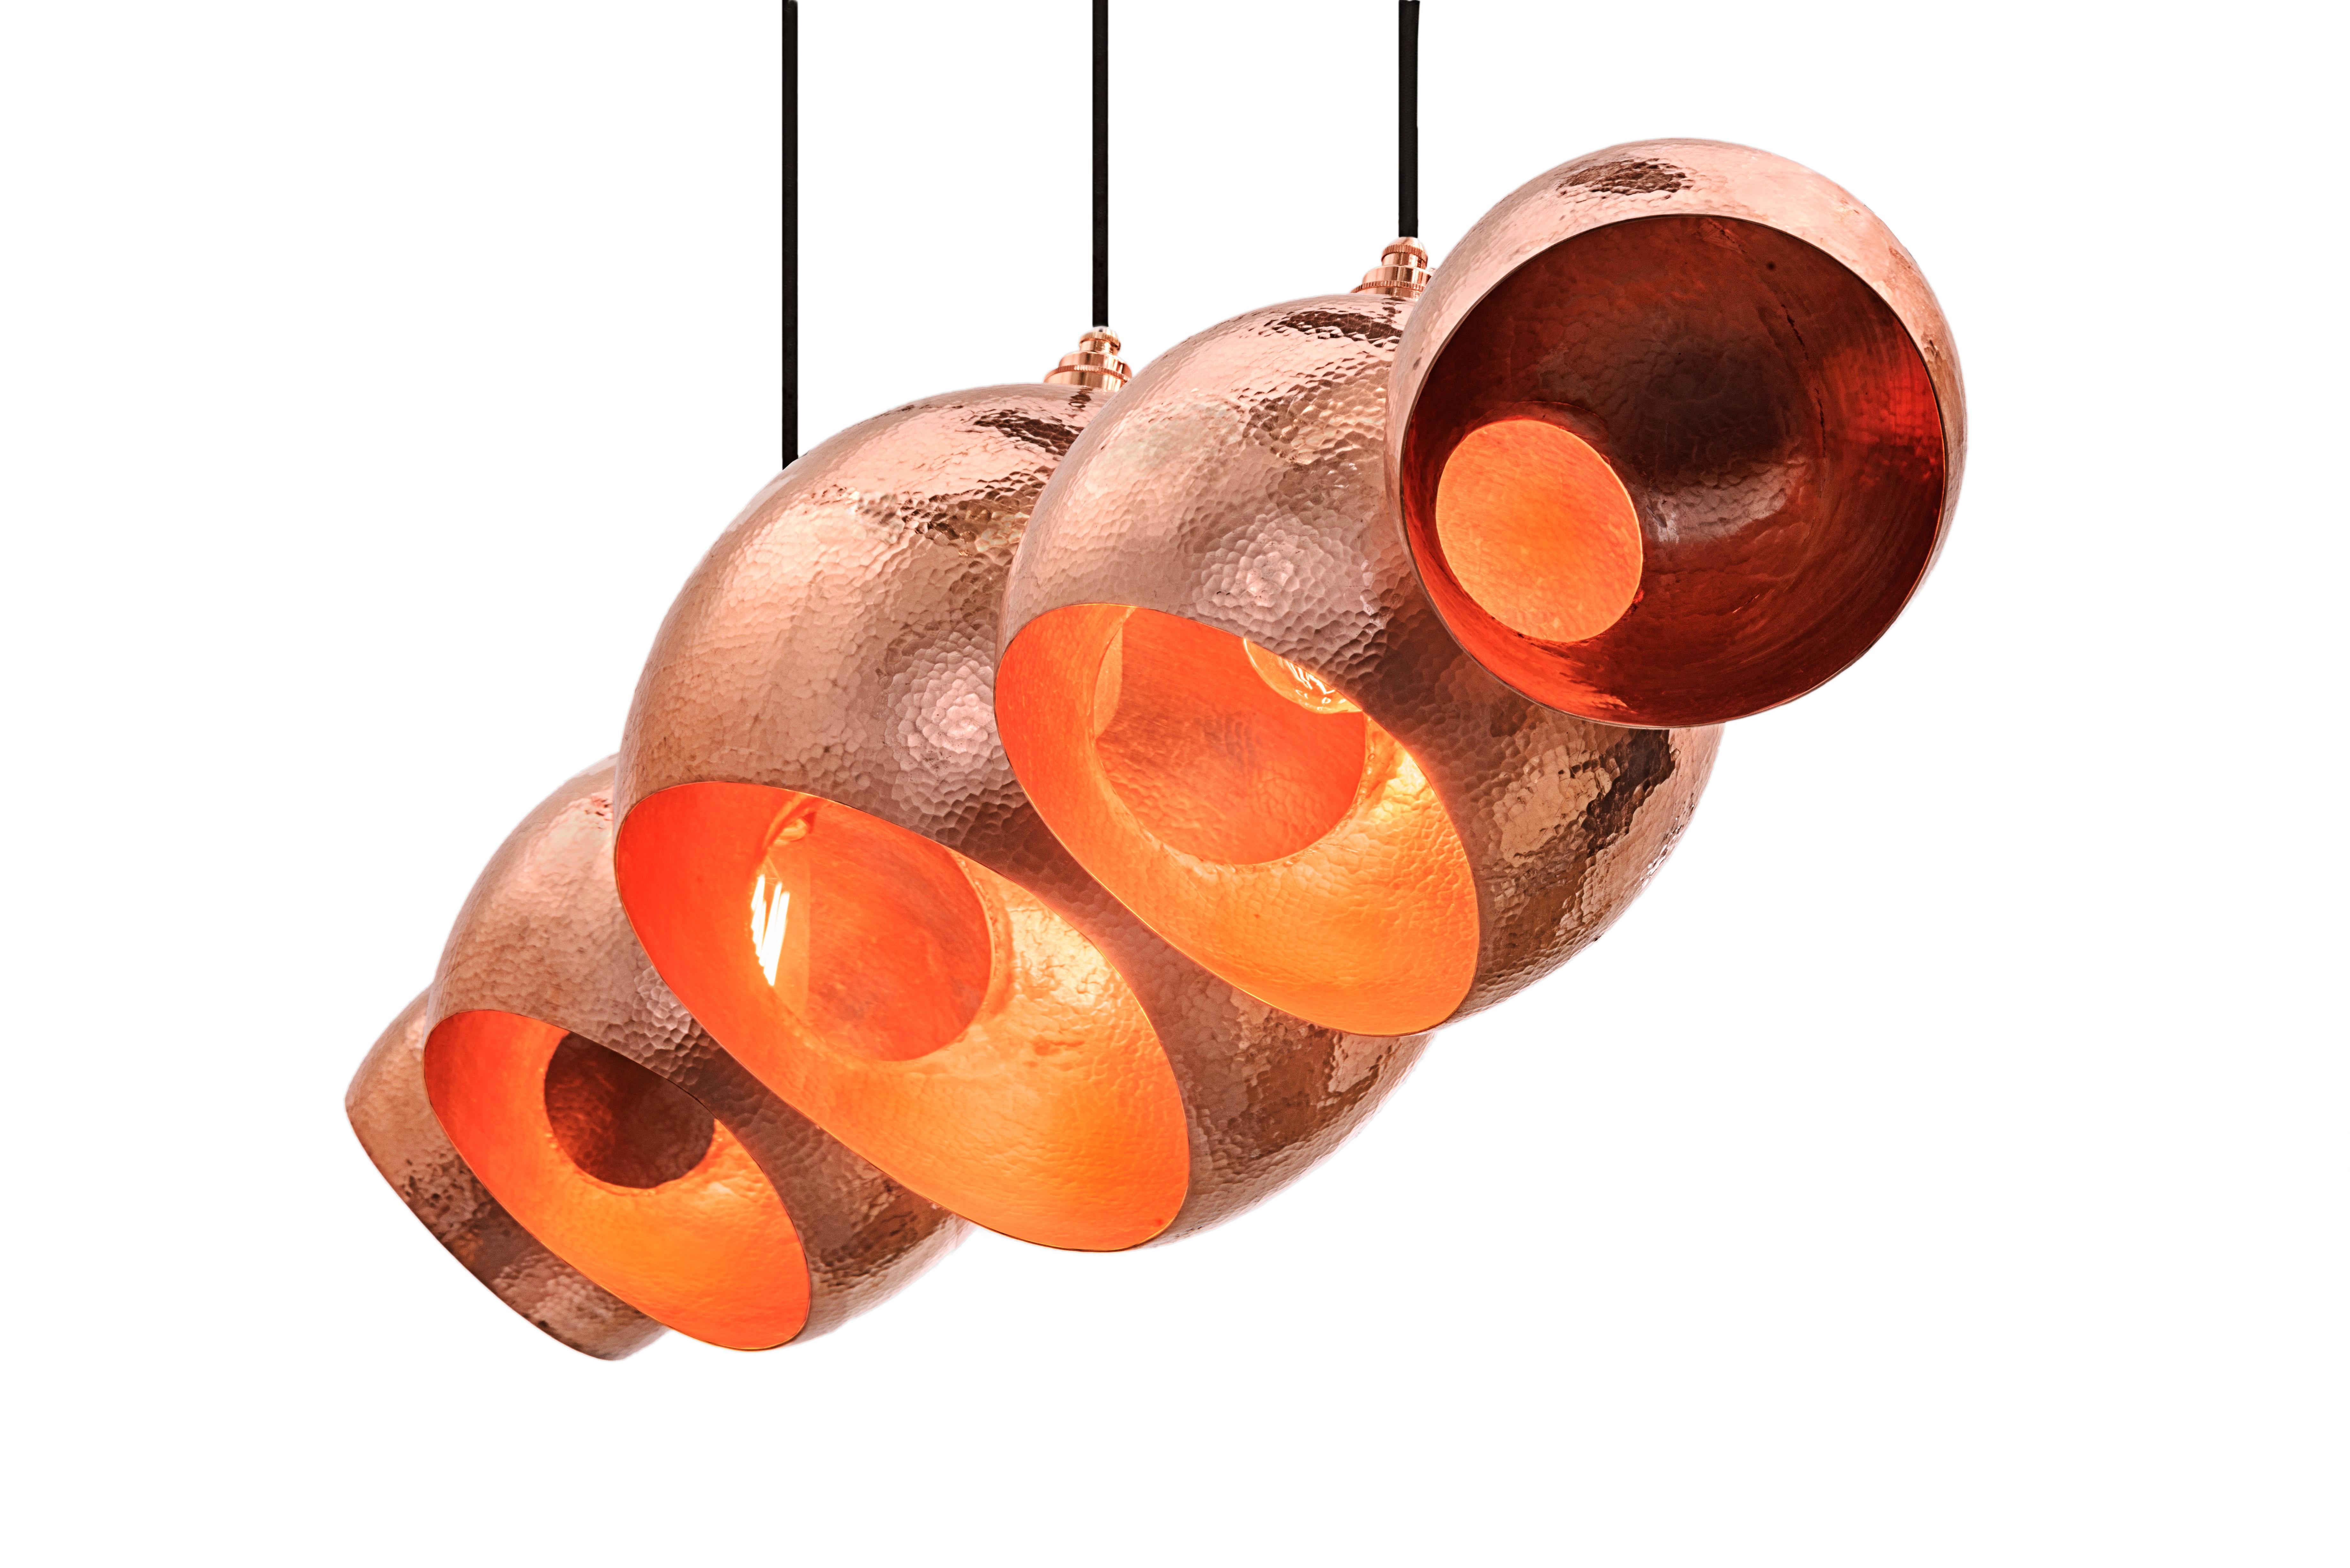 The Alquimia Orb: Levitate by Luminosa is a handmade solid copper pendant chandelier in polished hammer finish designed for the modern interior. The chandelier is polished on both the inside and outside creating a brilliant prominence. The Leviatate